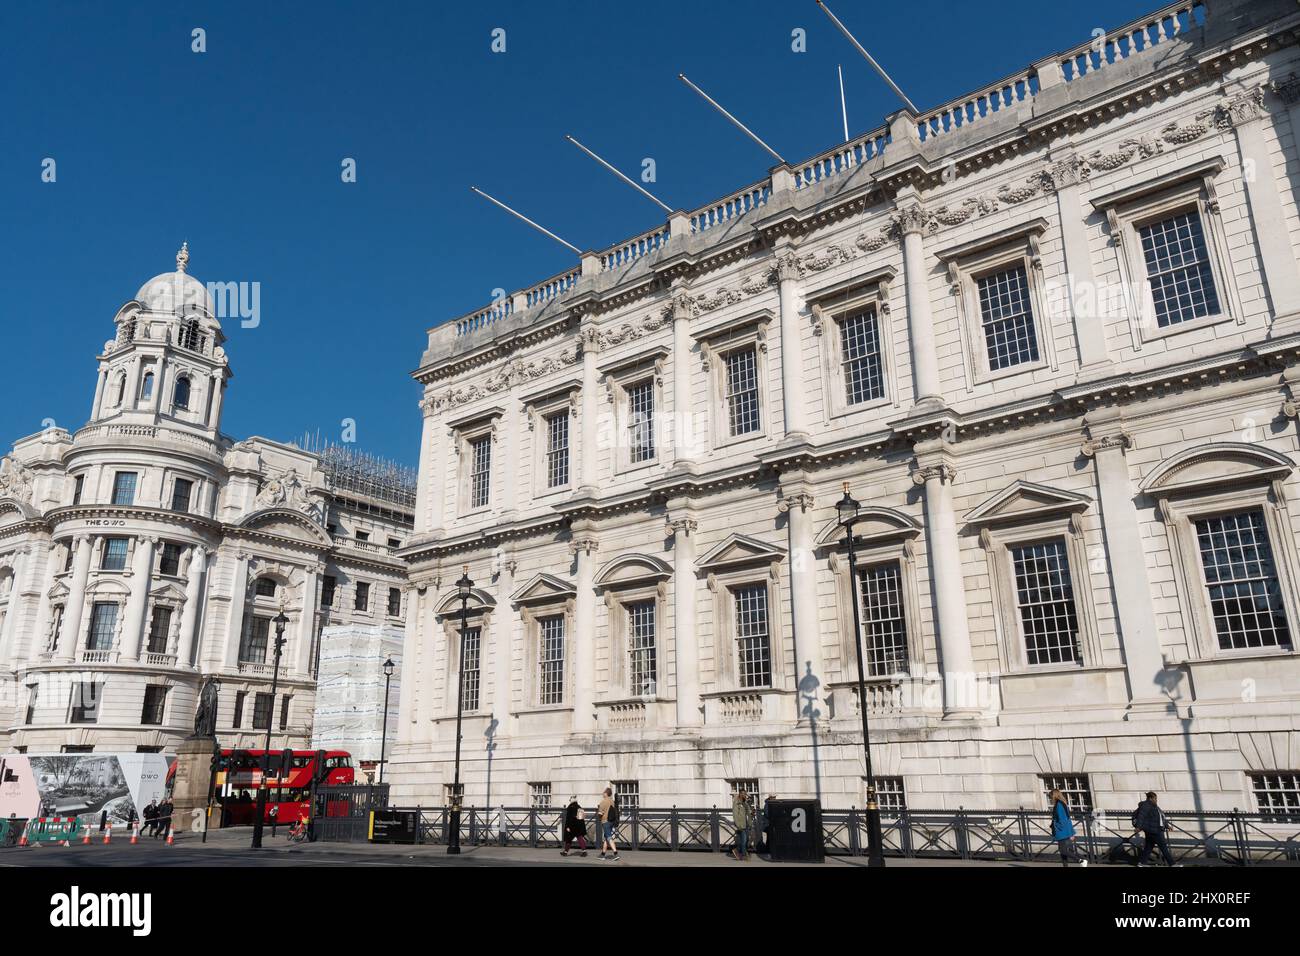 The Banqueting House, Palace of Whitehall, the residence of English monarchs from 1530 to 1698, Westminster, London, England Stock Photo